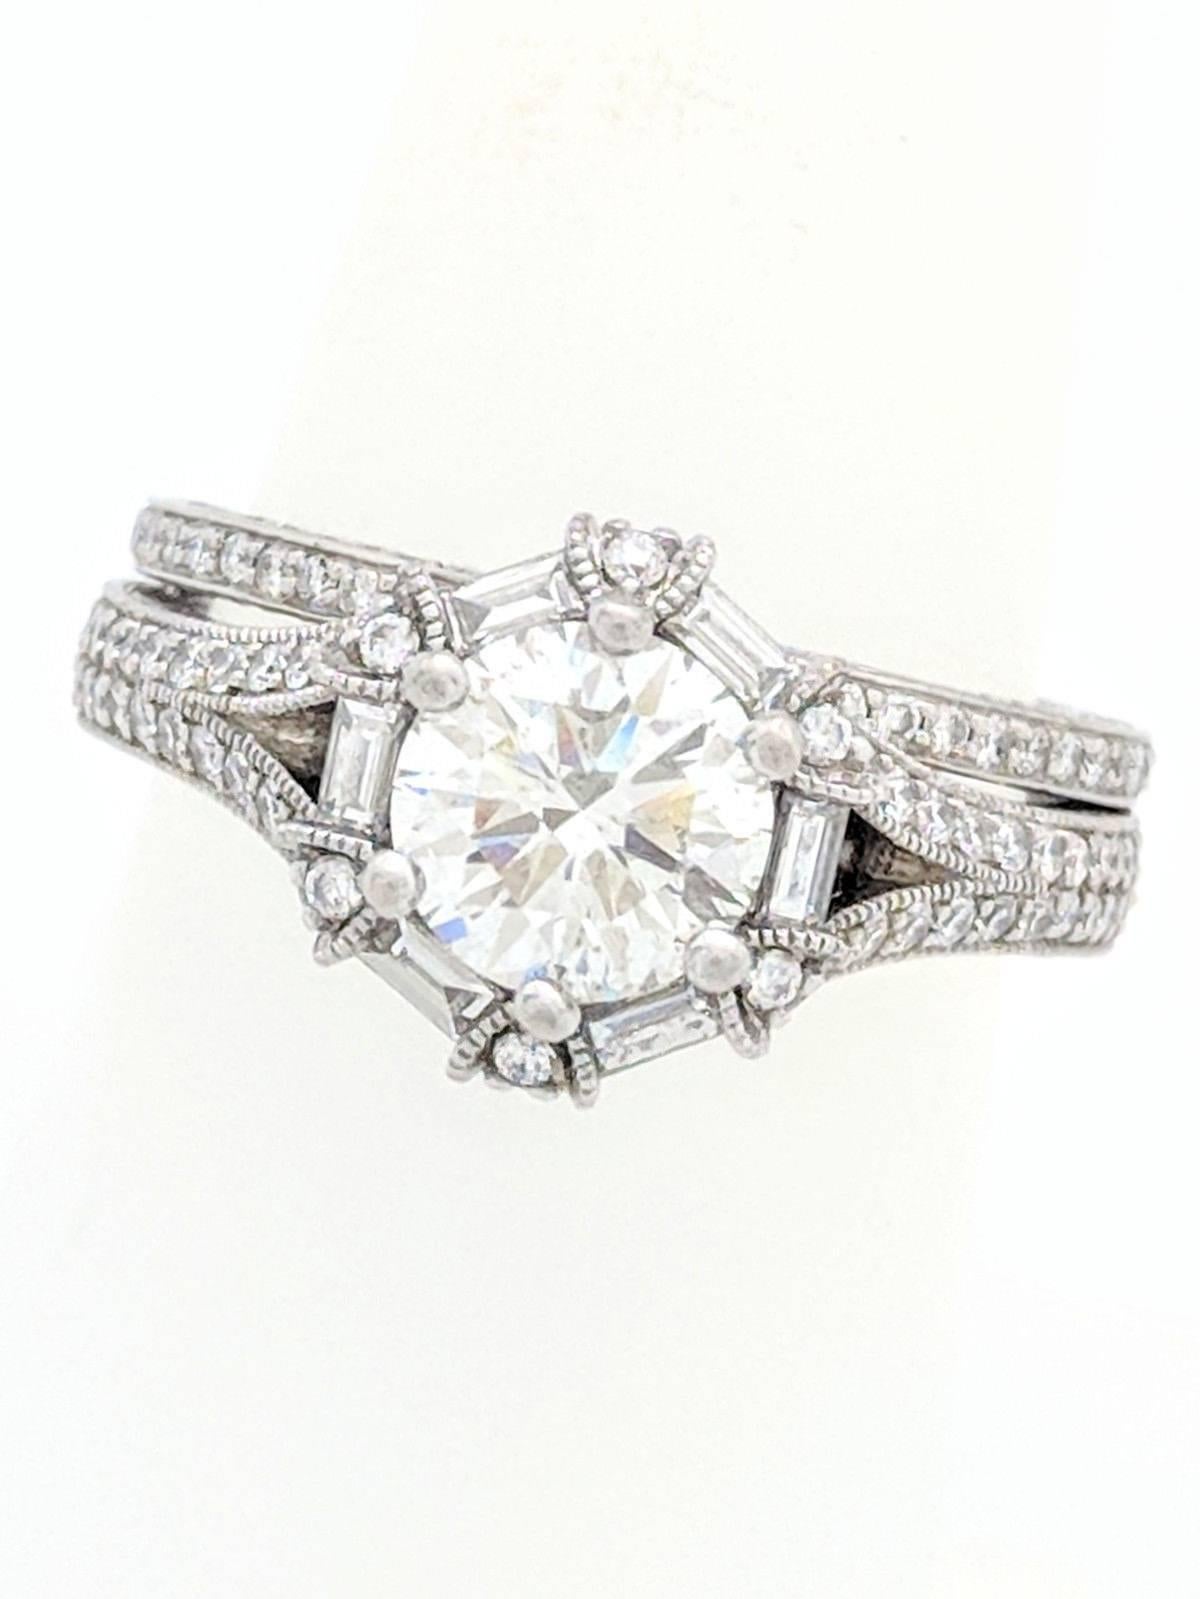  1.10ct. Round Brilliant Cut Natural Diamond Engagement Ring GIA Certified SI2/I

You are viewing a Stunning 1.10ct. natural brilliant cut diamond. This diamond is certified by GIA (Gemological Institute of America) and has been graded as SI2 in